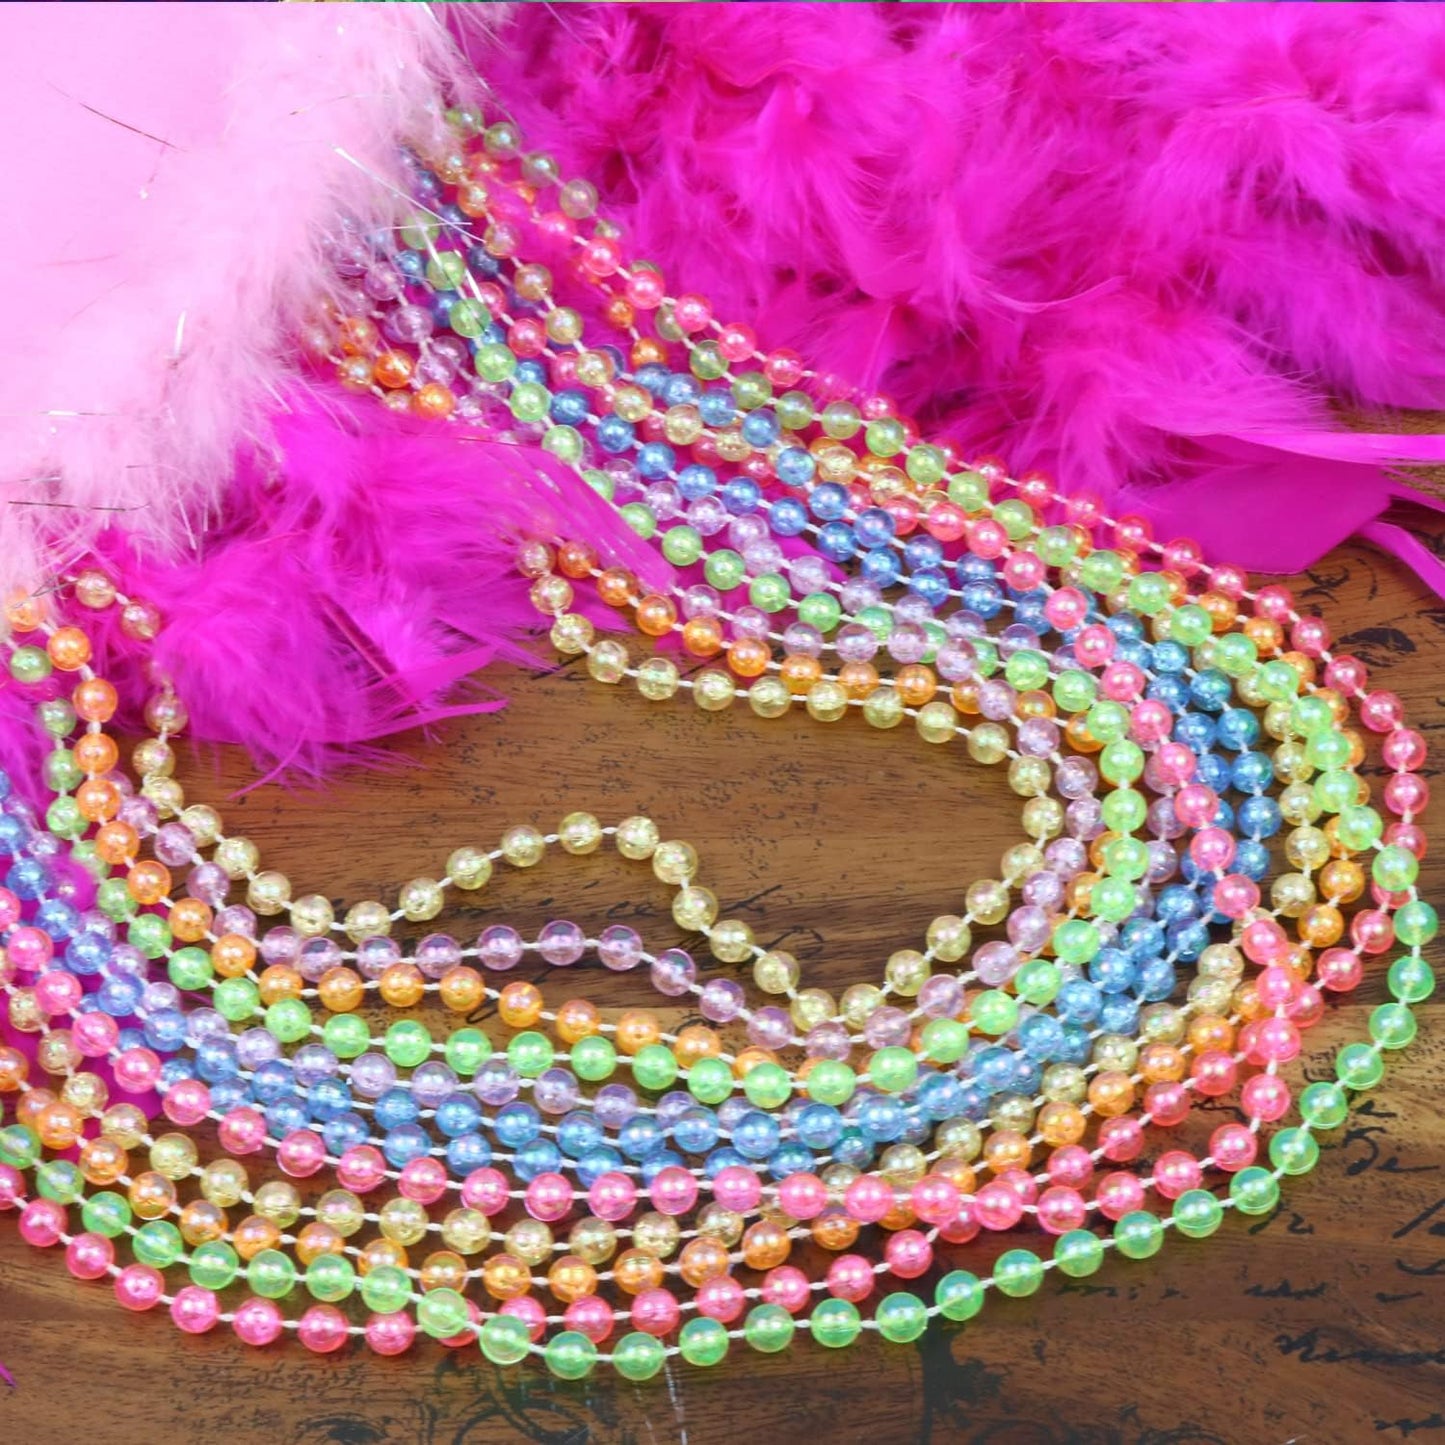 GIFTEXPRESS 33" Multicolor Mardi Gras Beads Necklace (Pack of 12)